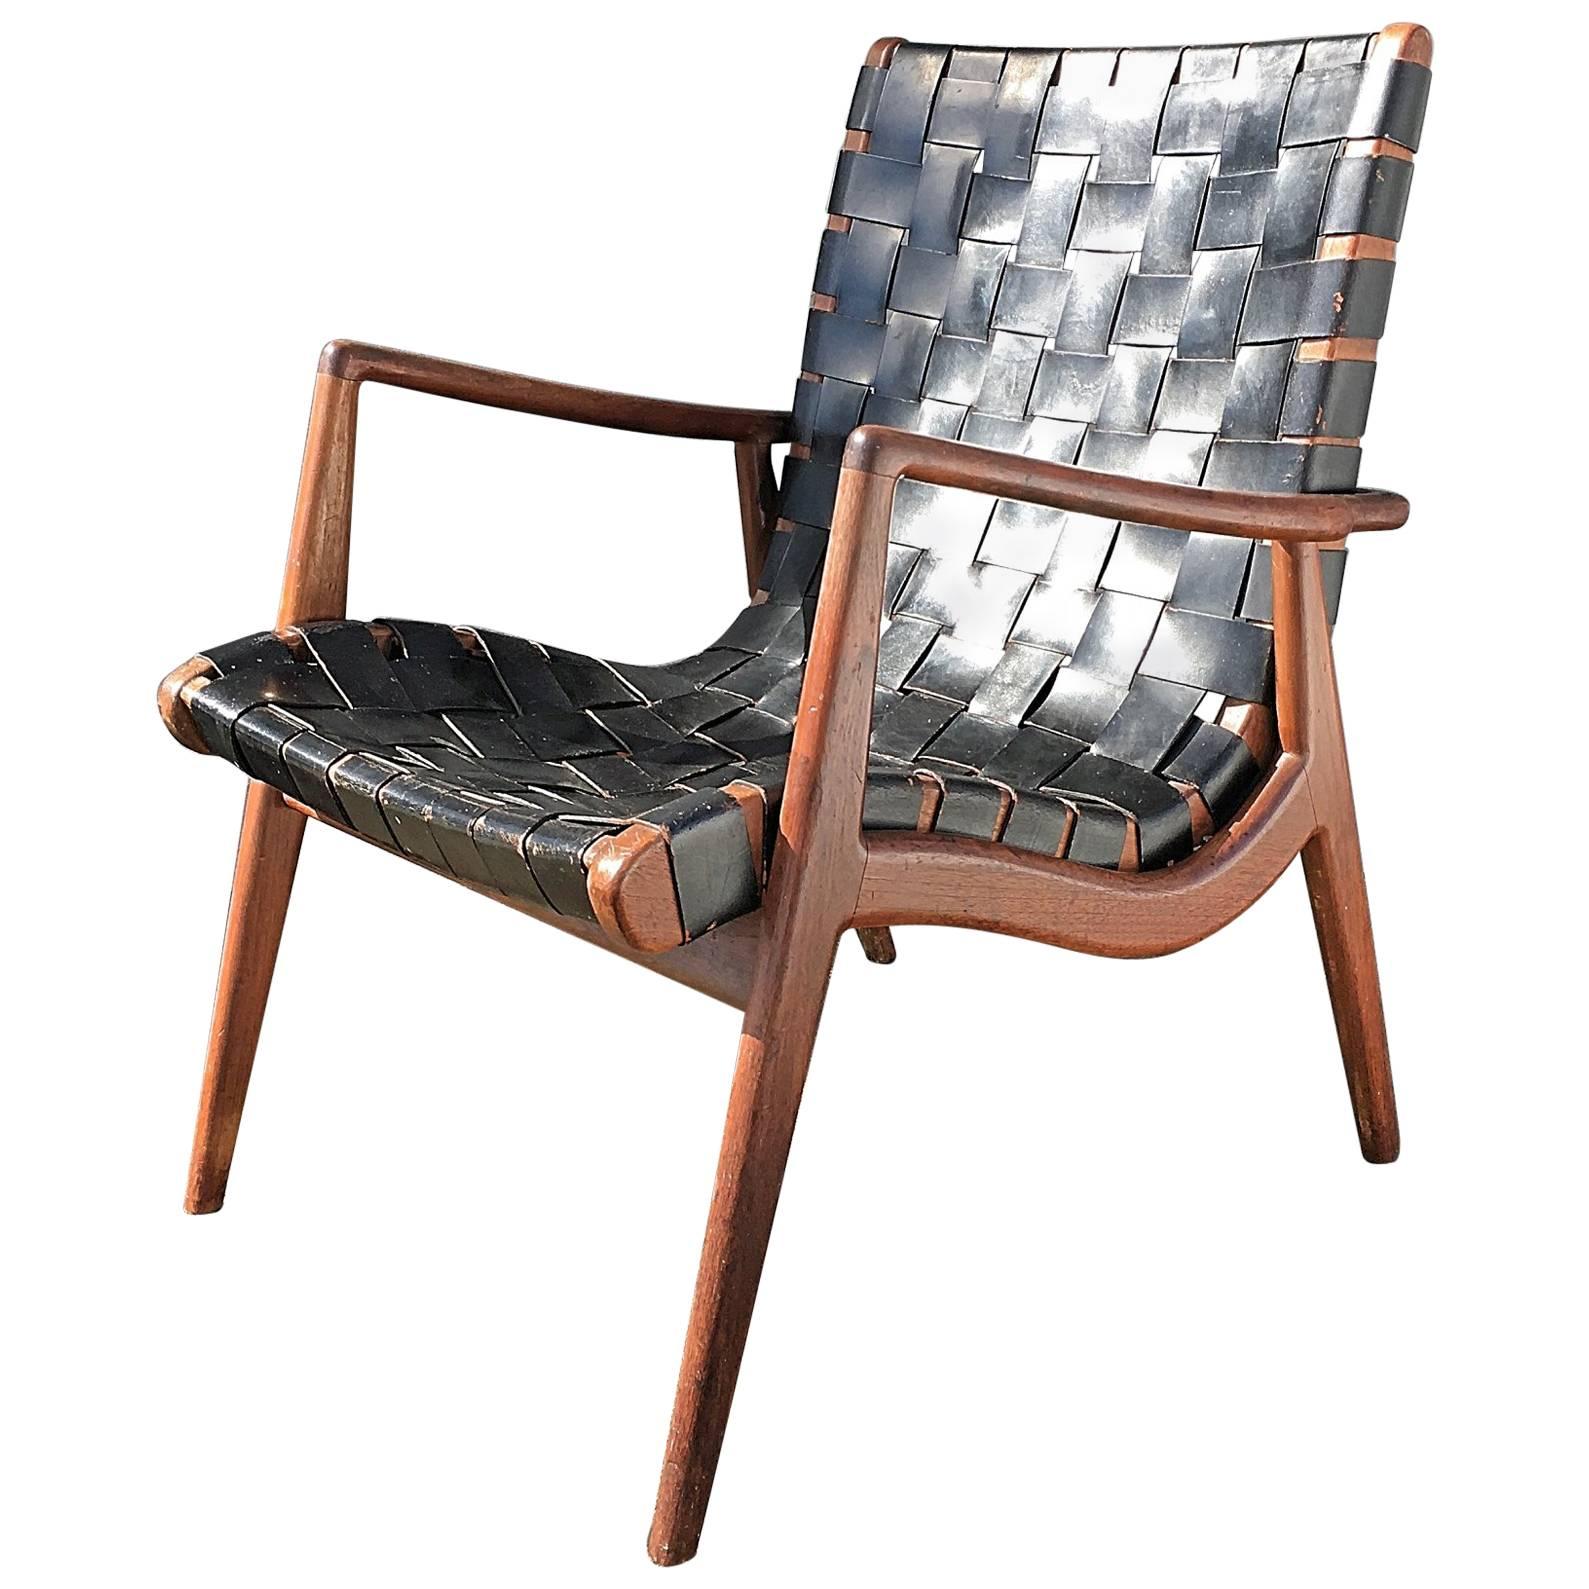 Walnut and Leather Strap Lounge Chair by Mel Smilow